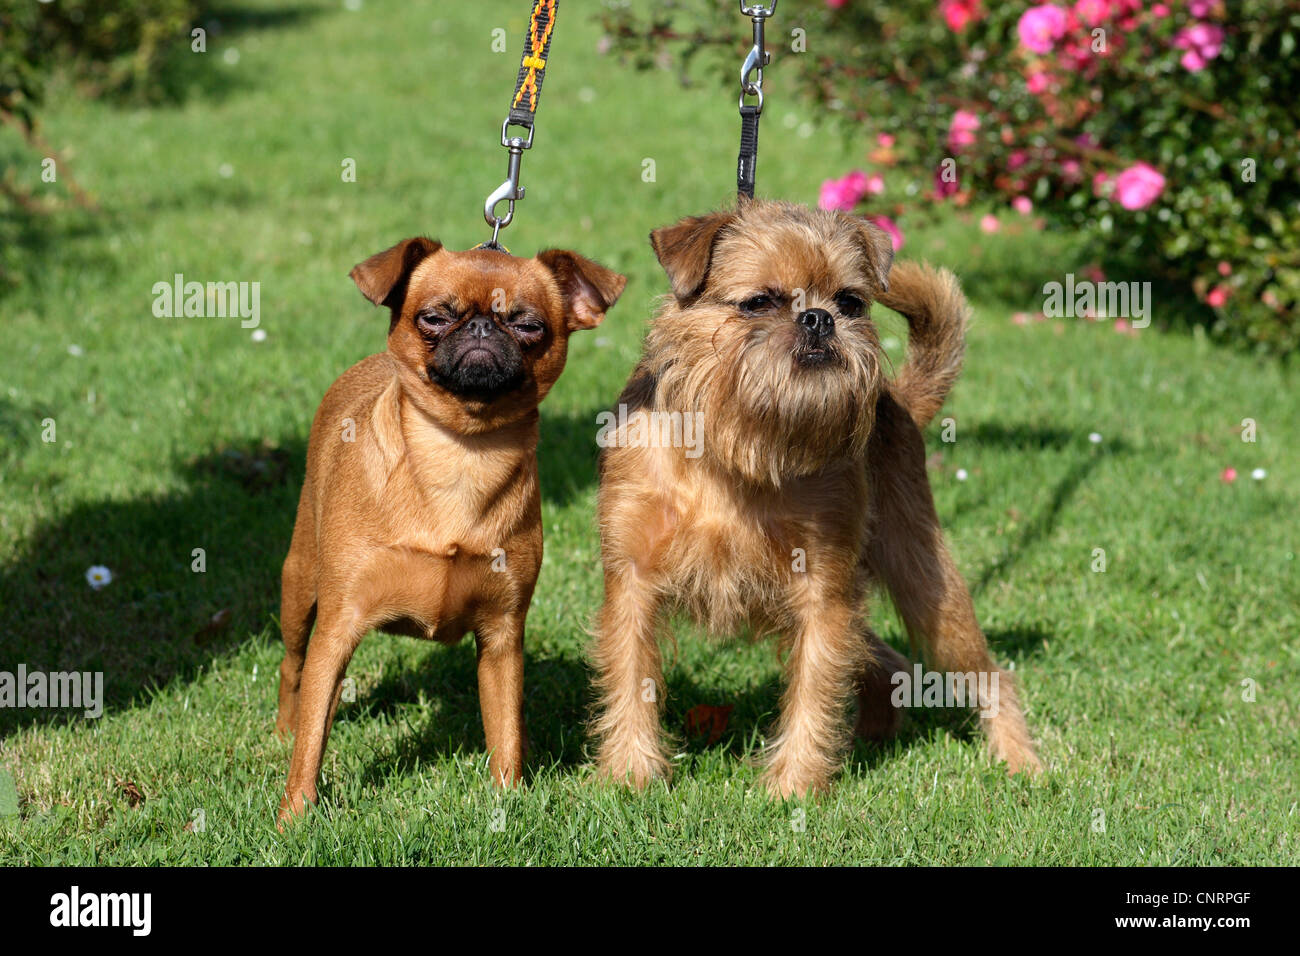 Small Brabant Griffon (Canis lupus f. familiaris), Small Brabant Griffon and Belgian Griffon standing side by side in lawn Stock Photo